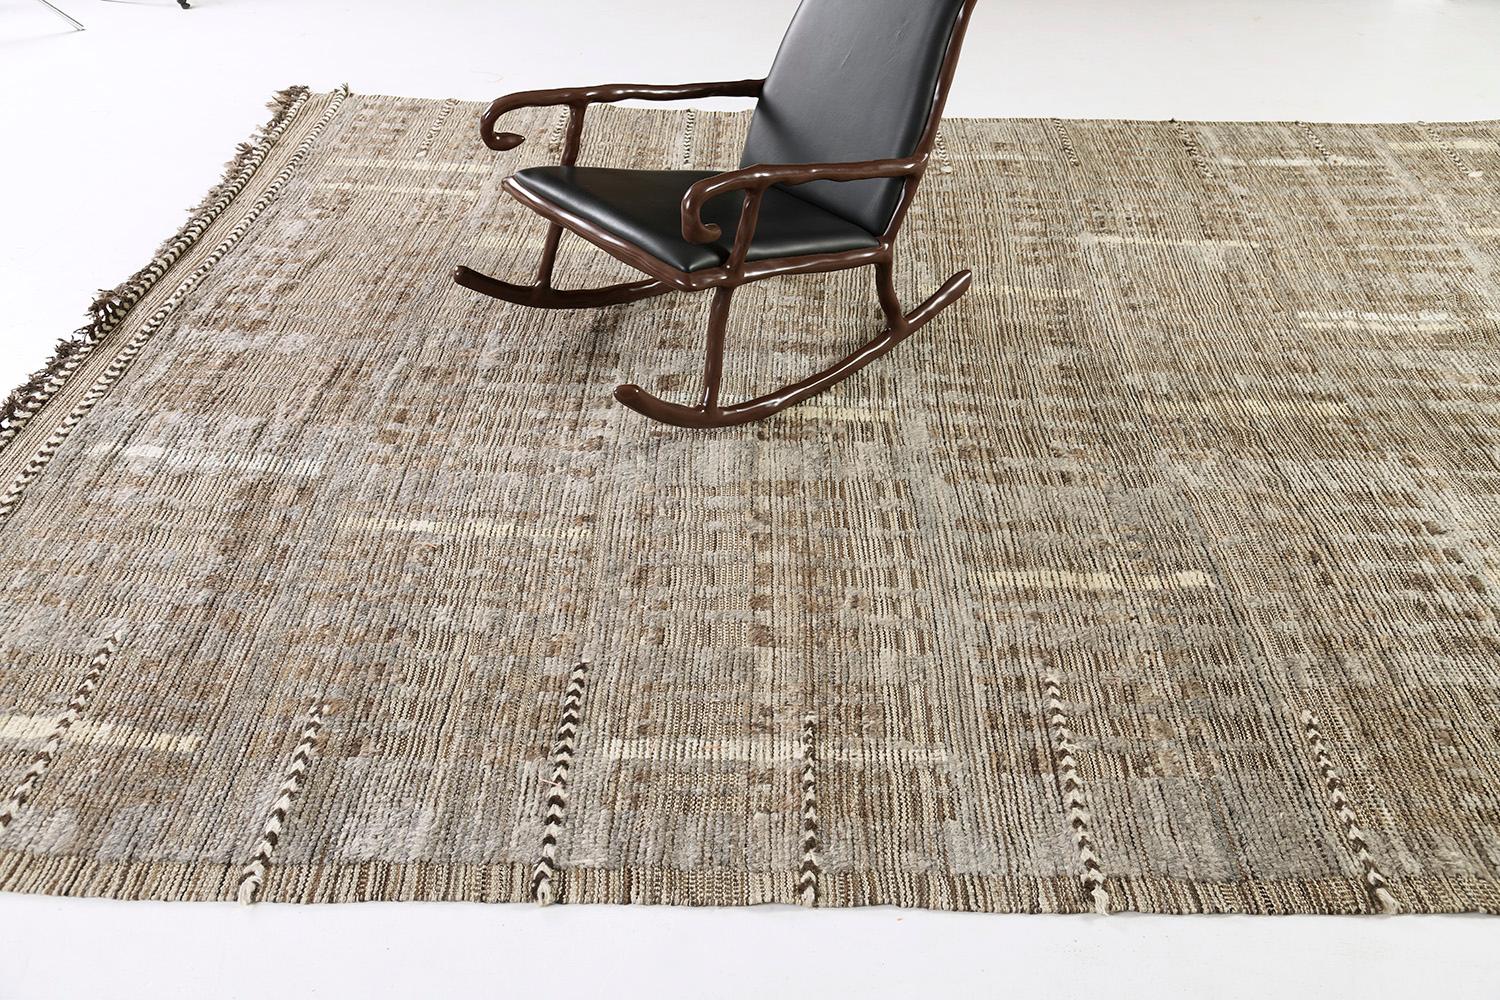 Bacatta uses linework and color to create definition and movement into handwoven wool. Line detailing in earthy tones fascinatingly moves across the rug. Detailed natural pile weave runs around the border with tassels adding an exquisite decorative